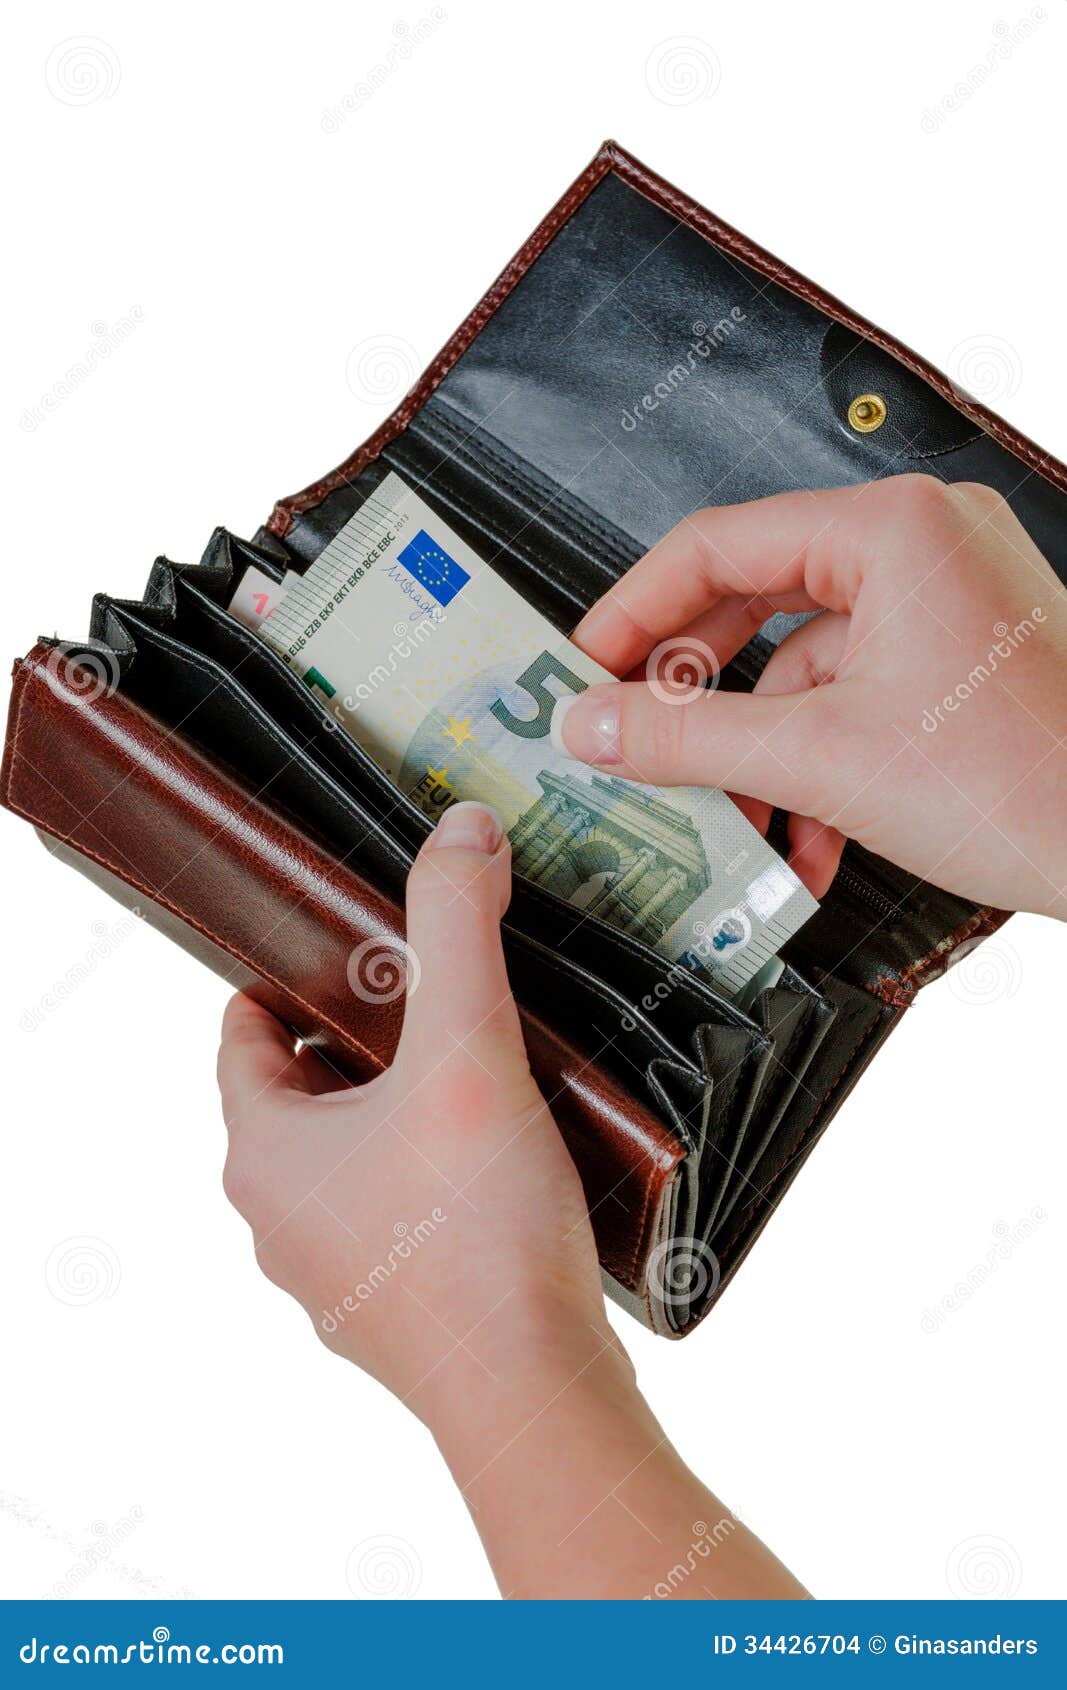 Wallet With Euro Bills Stock Images - Image: 34426704